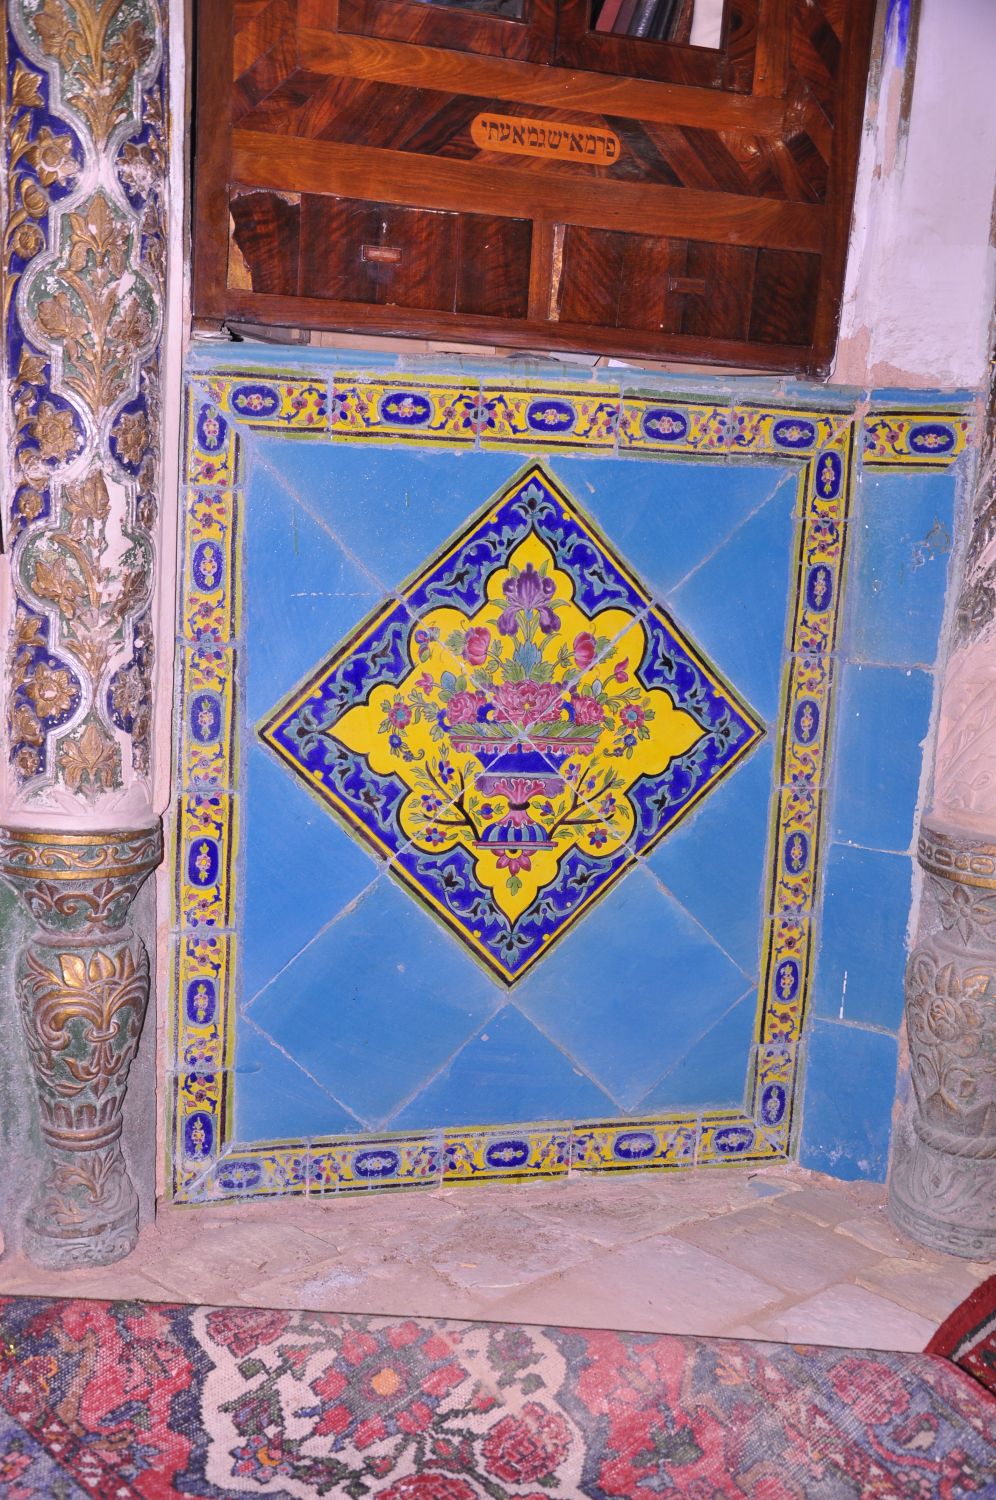 Tilework in the interior space.